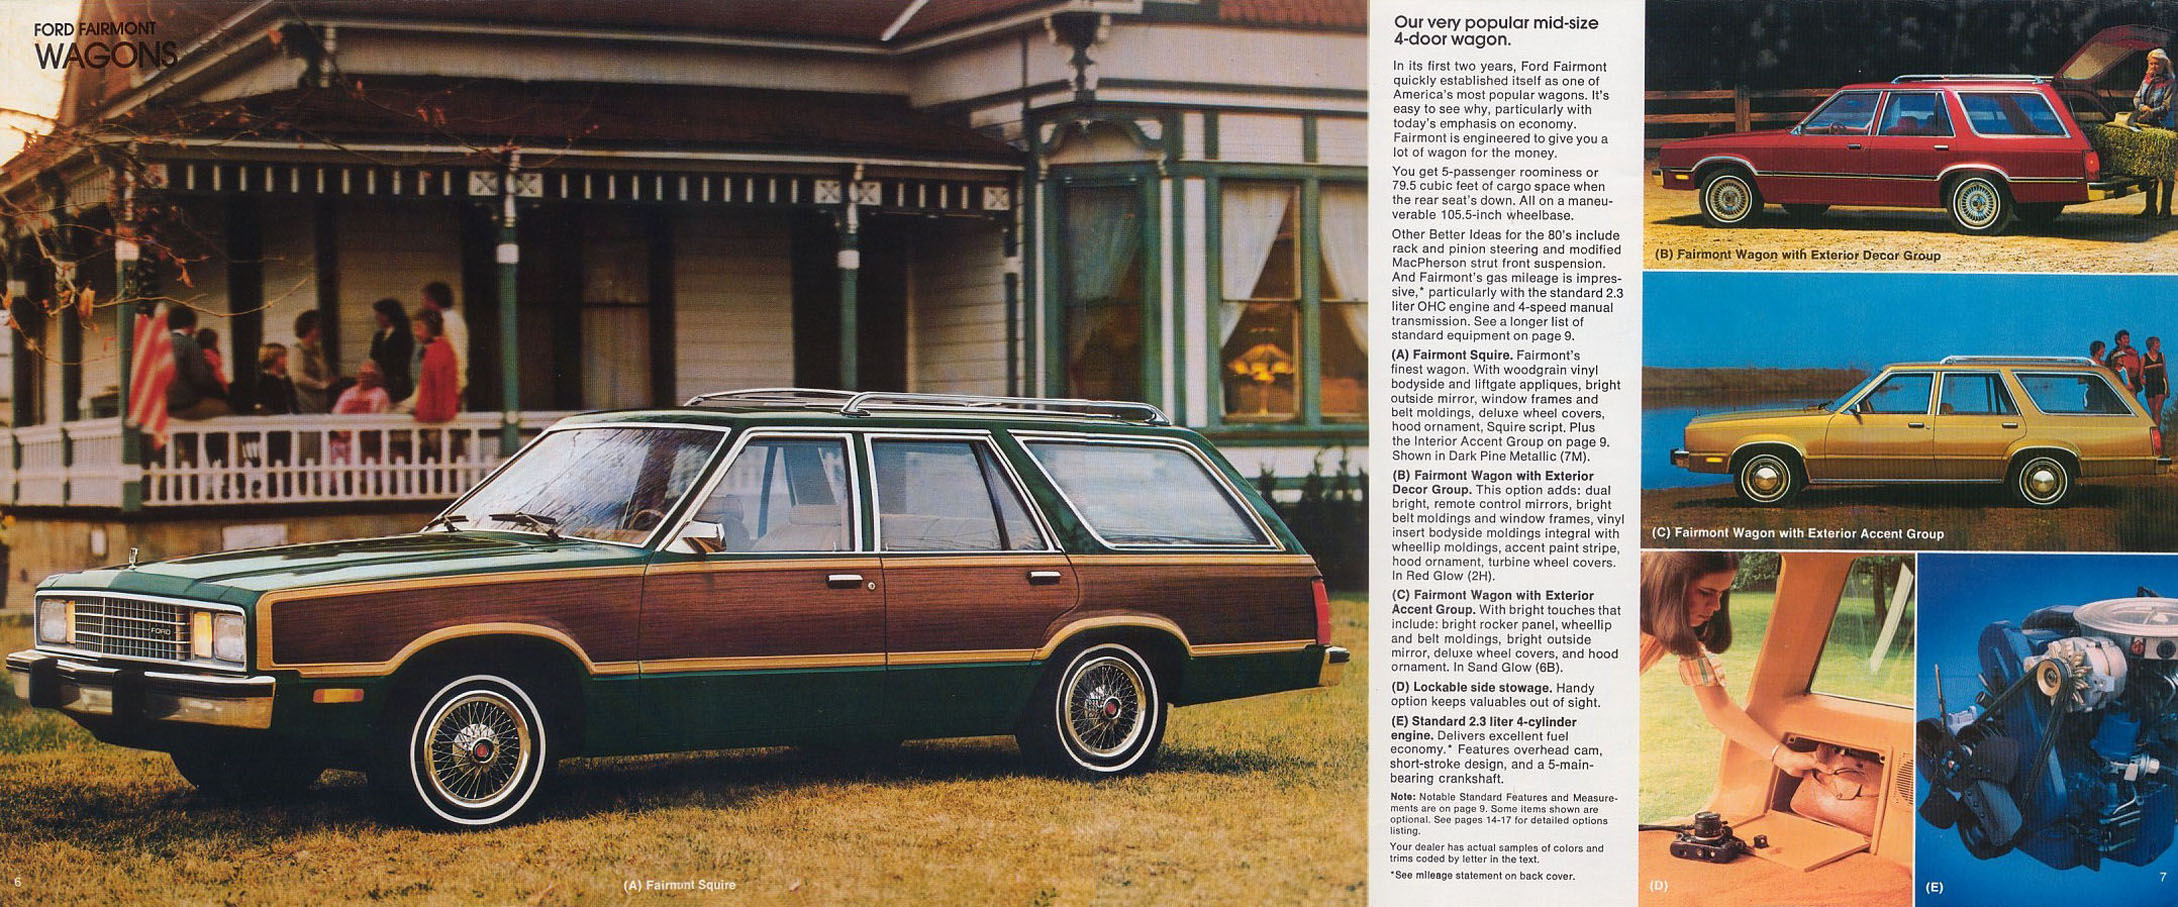 1980 Ford Wagons Brochure Page 4